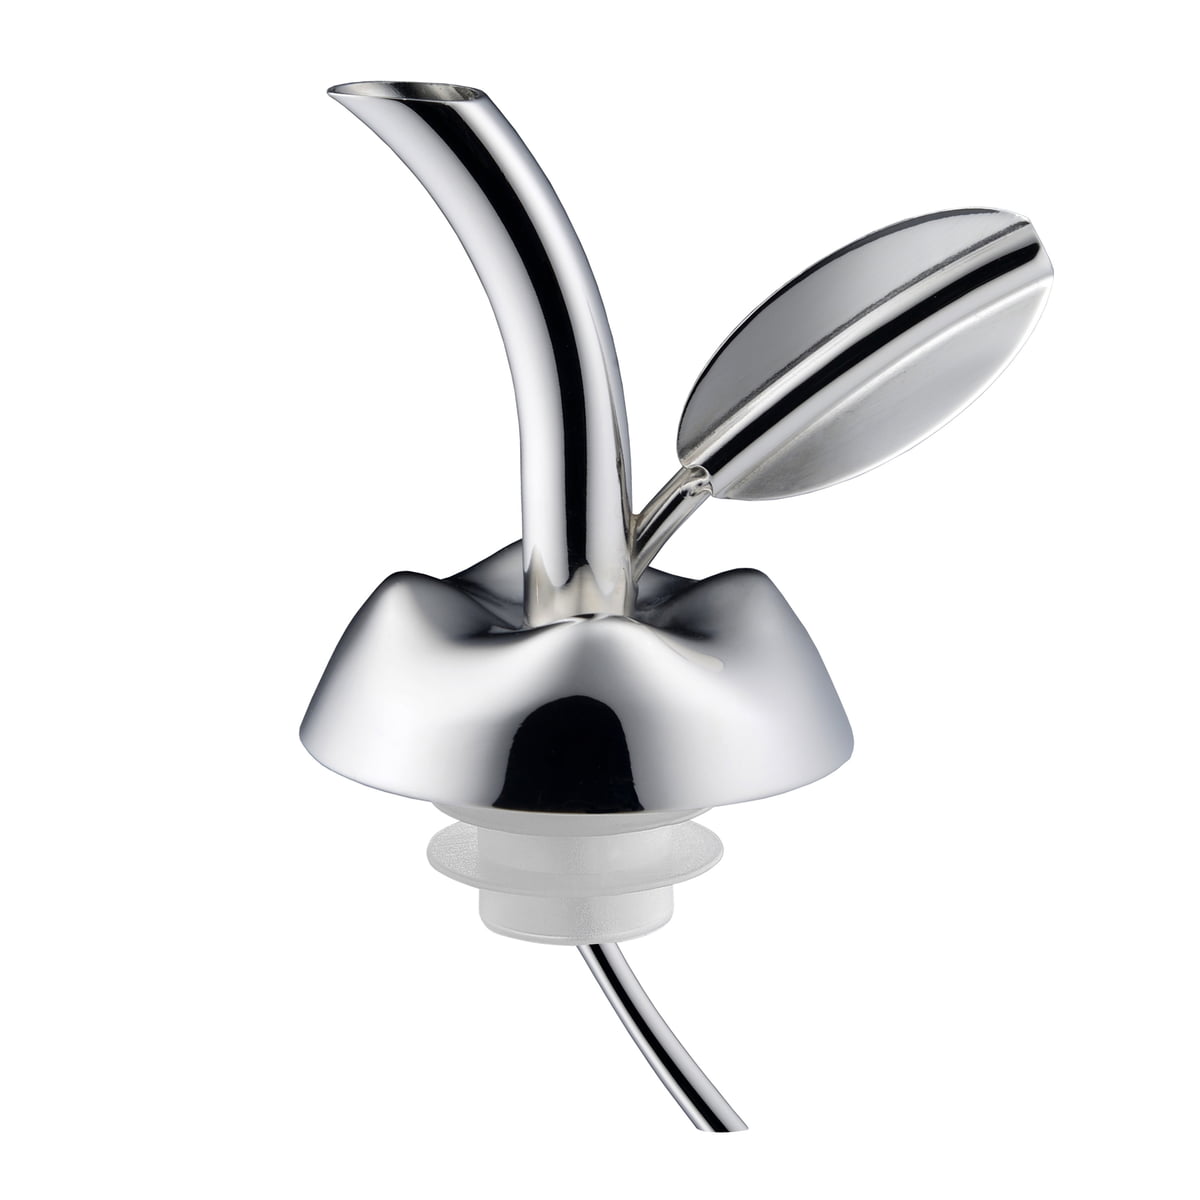 The Alessi Fior d'olio pourer in the shop